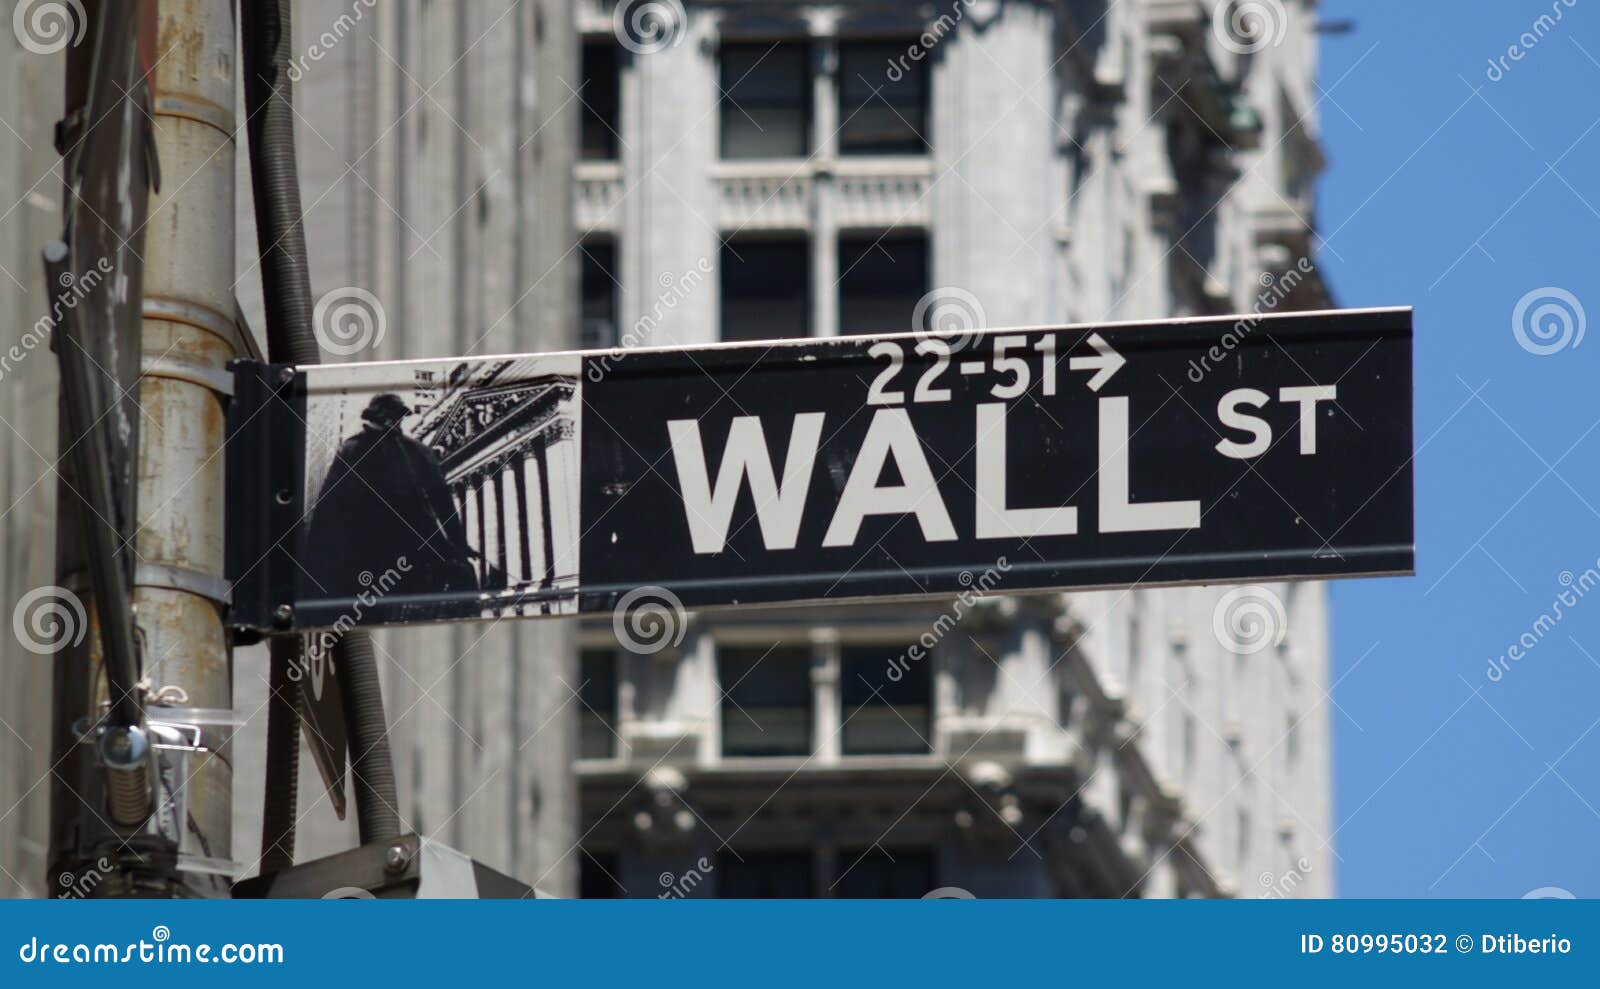 wall st finance and investments editorial photography - image of